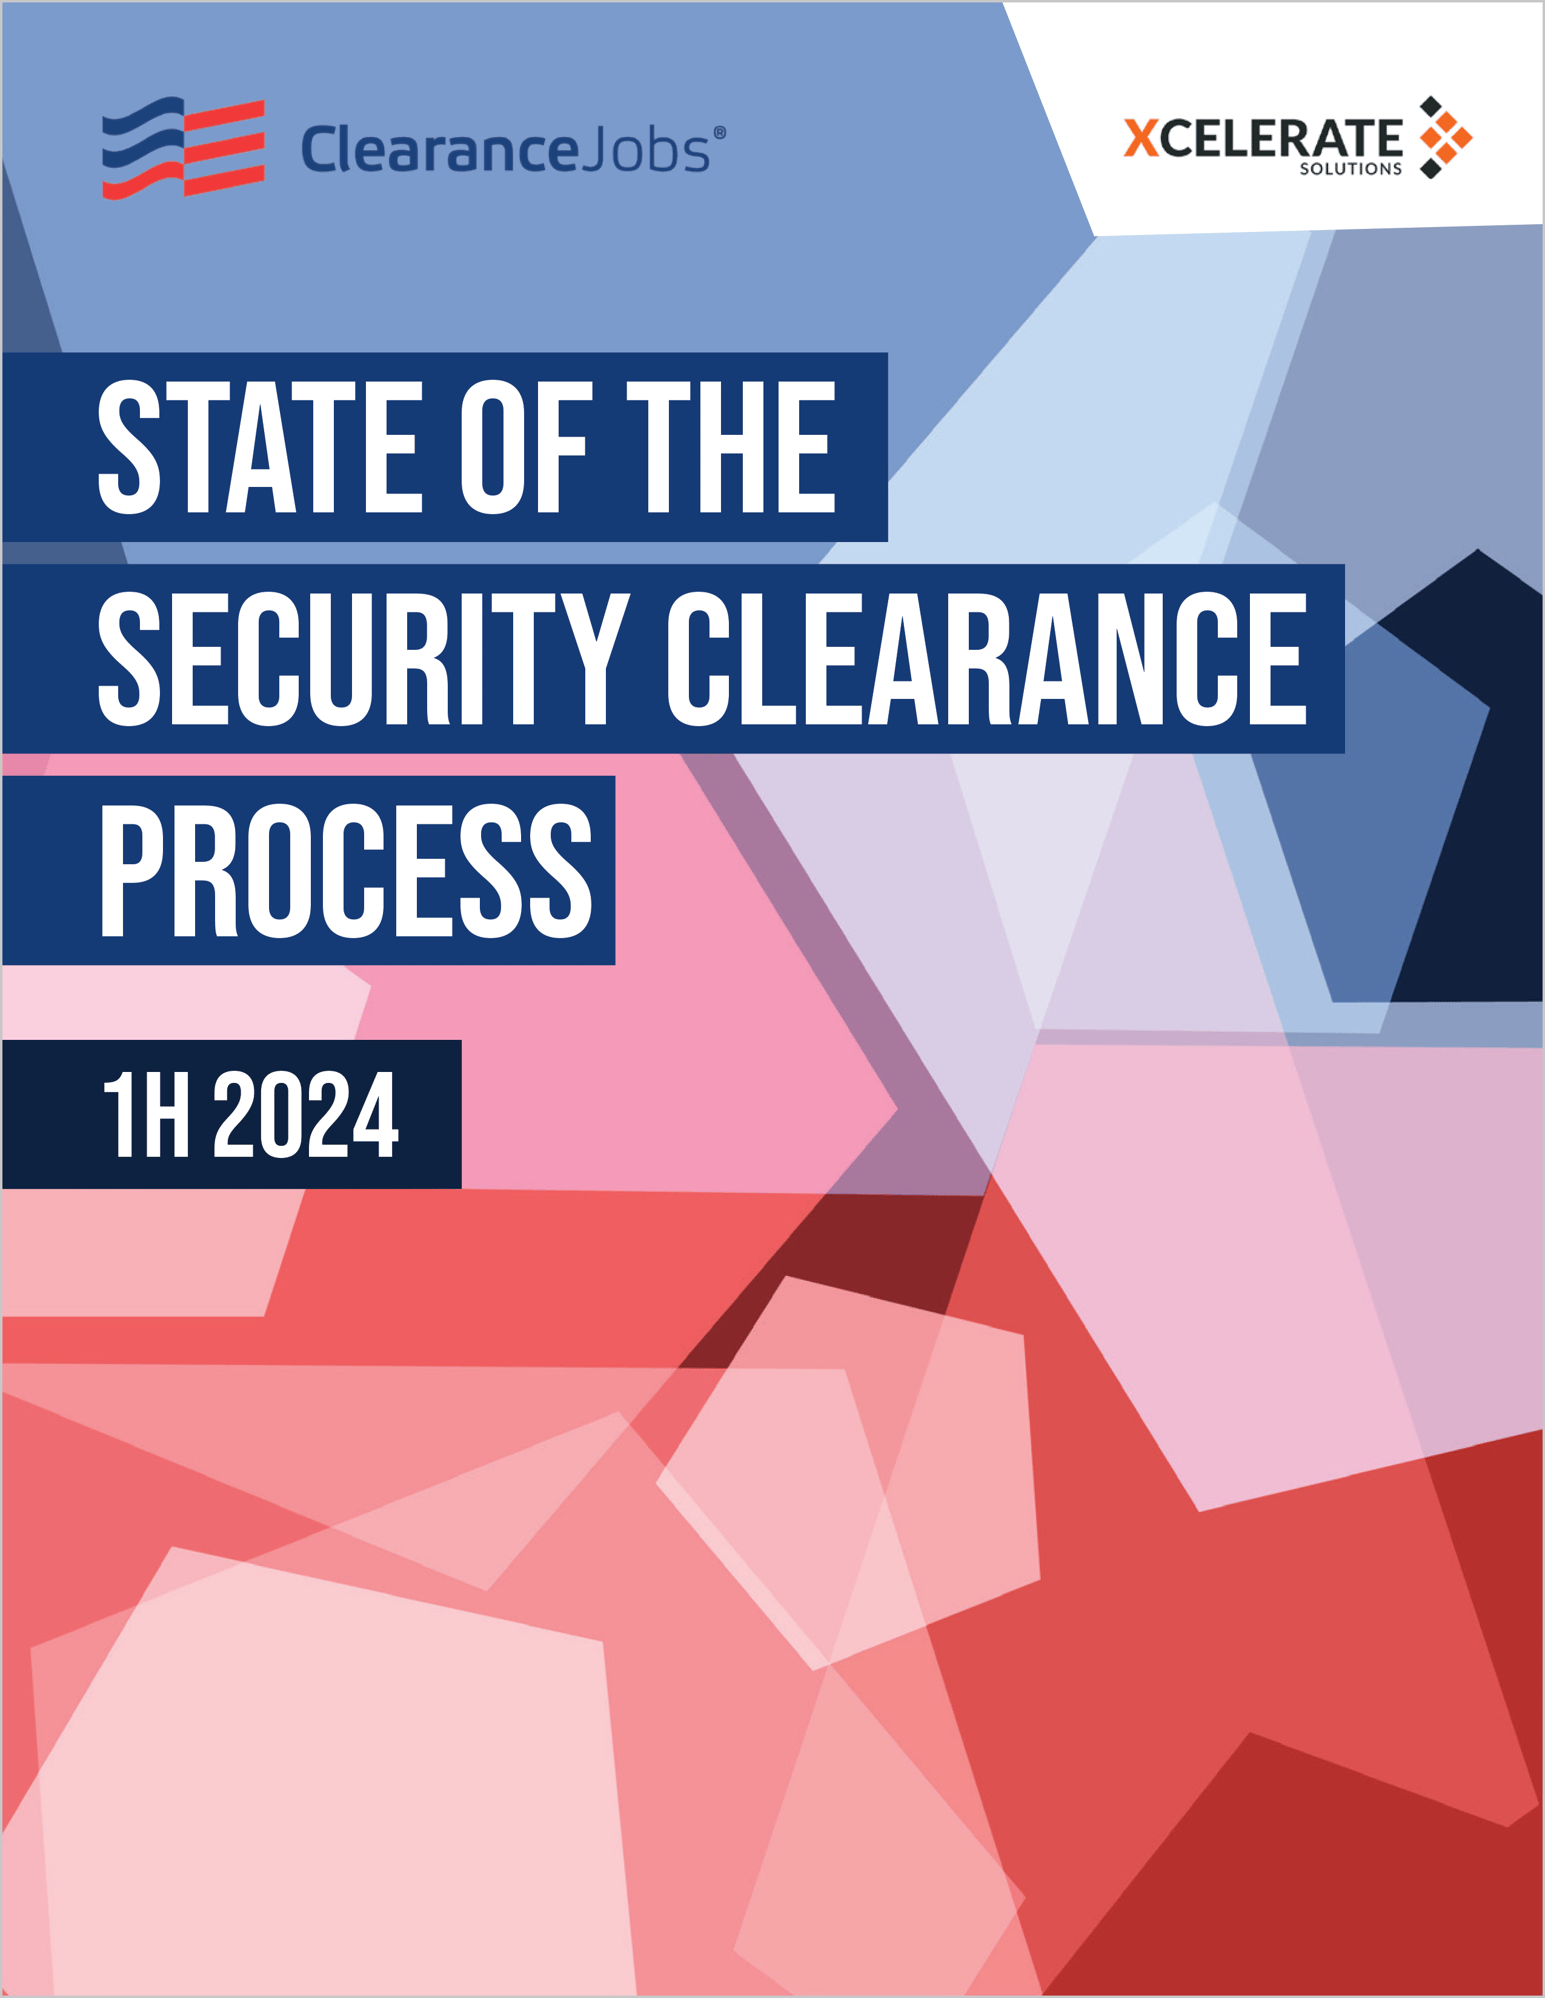 StateOfTheSecurityClearanceProcess1H2024-1